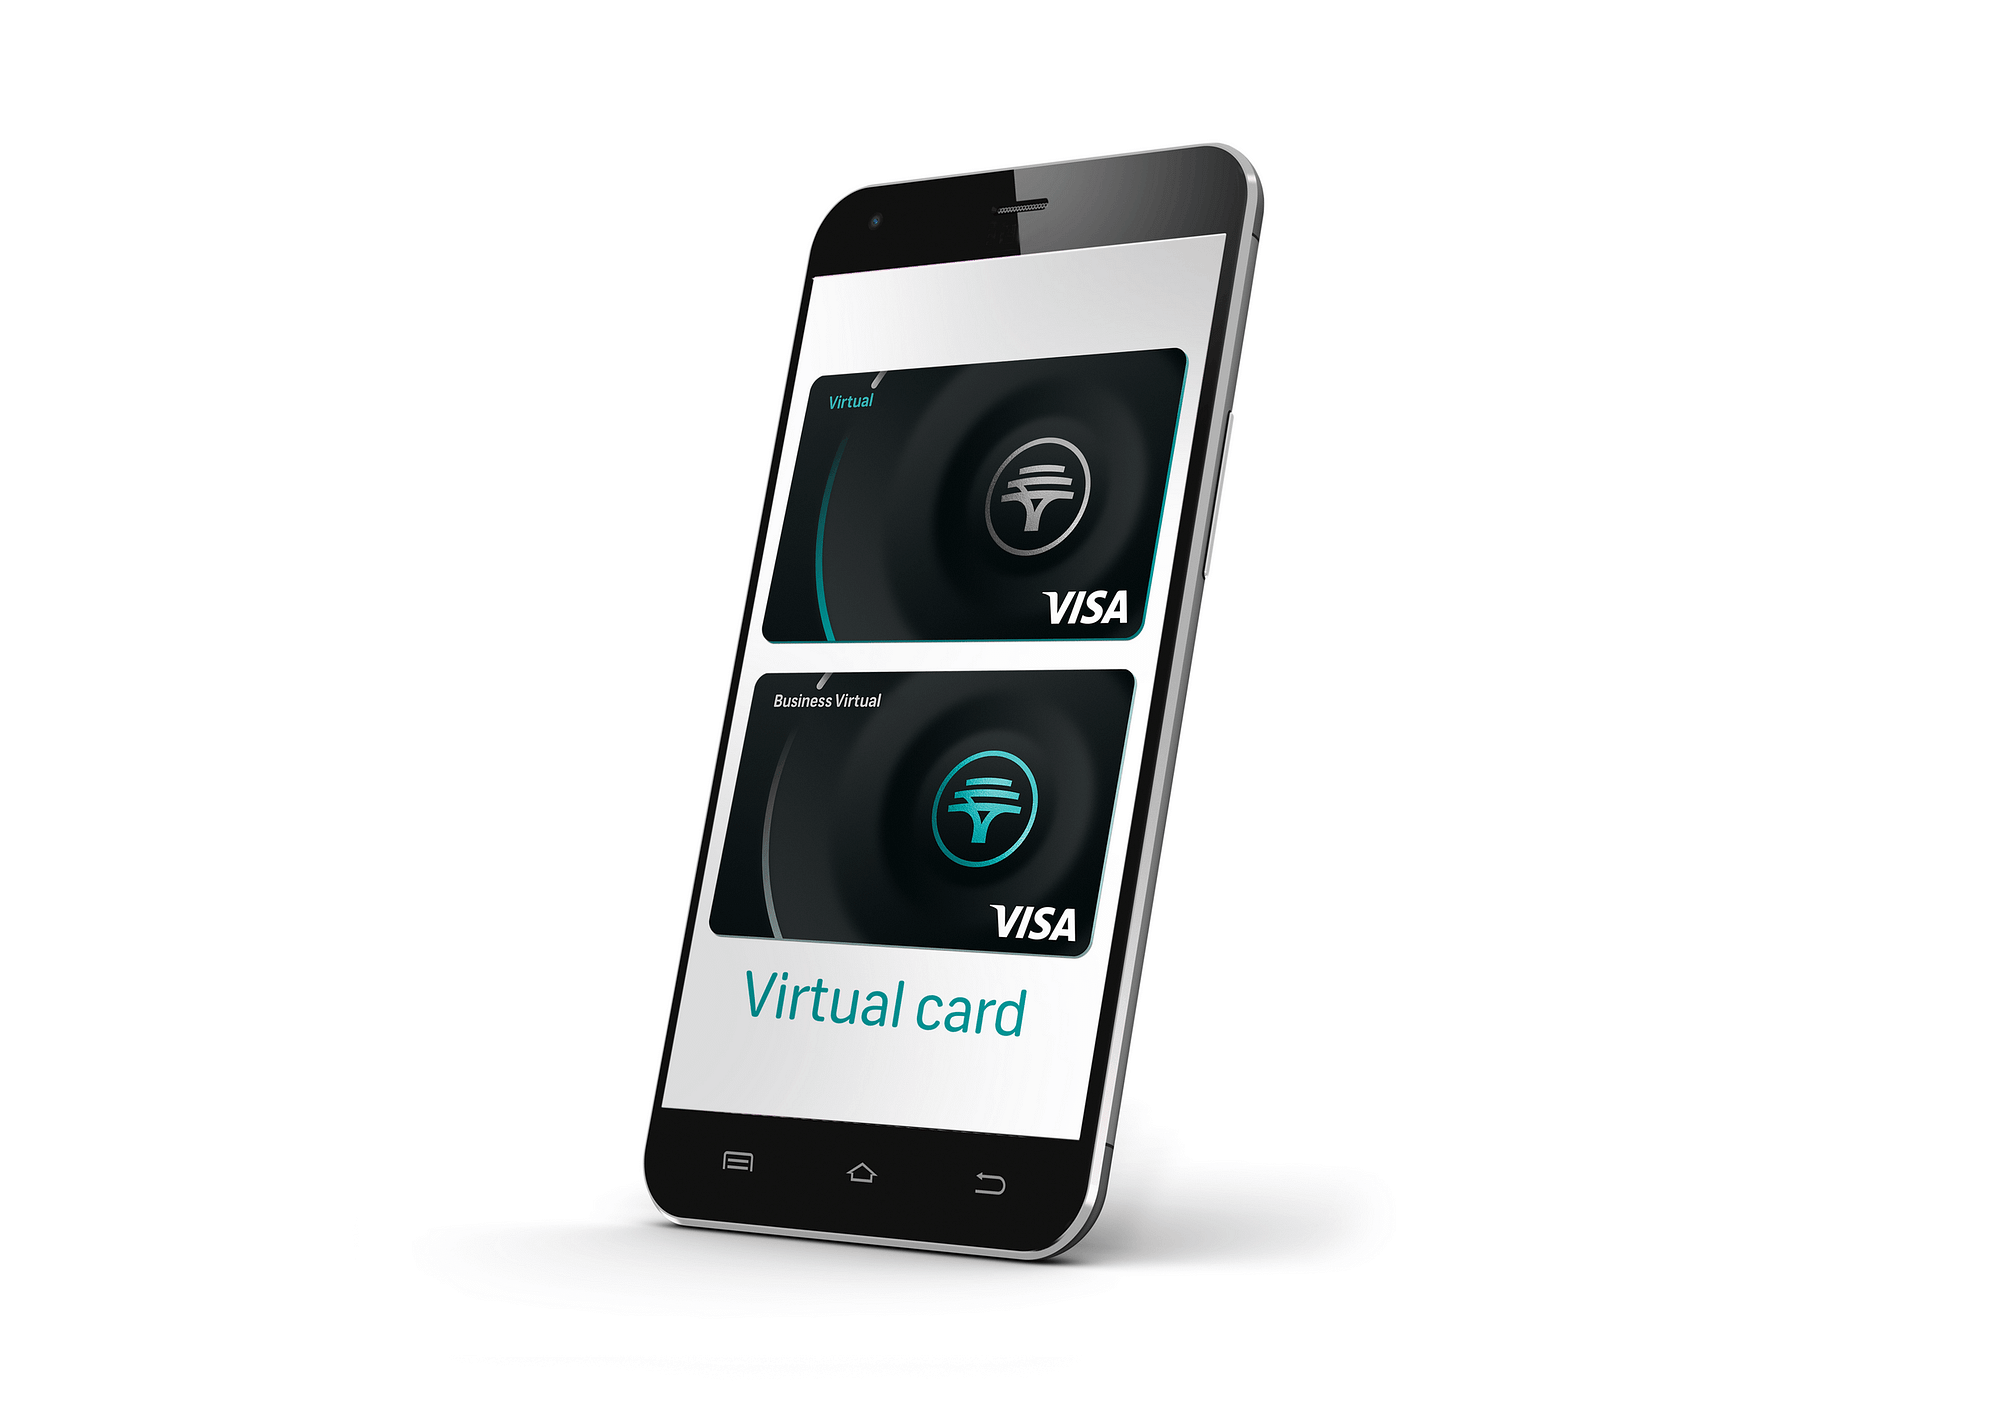 Image of FNB virtual cards on a phone display created for Black Friday